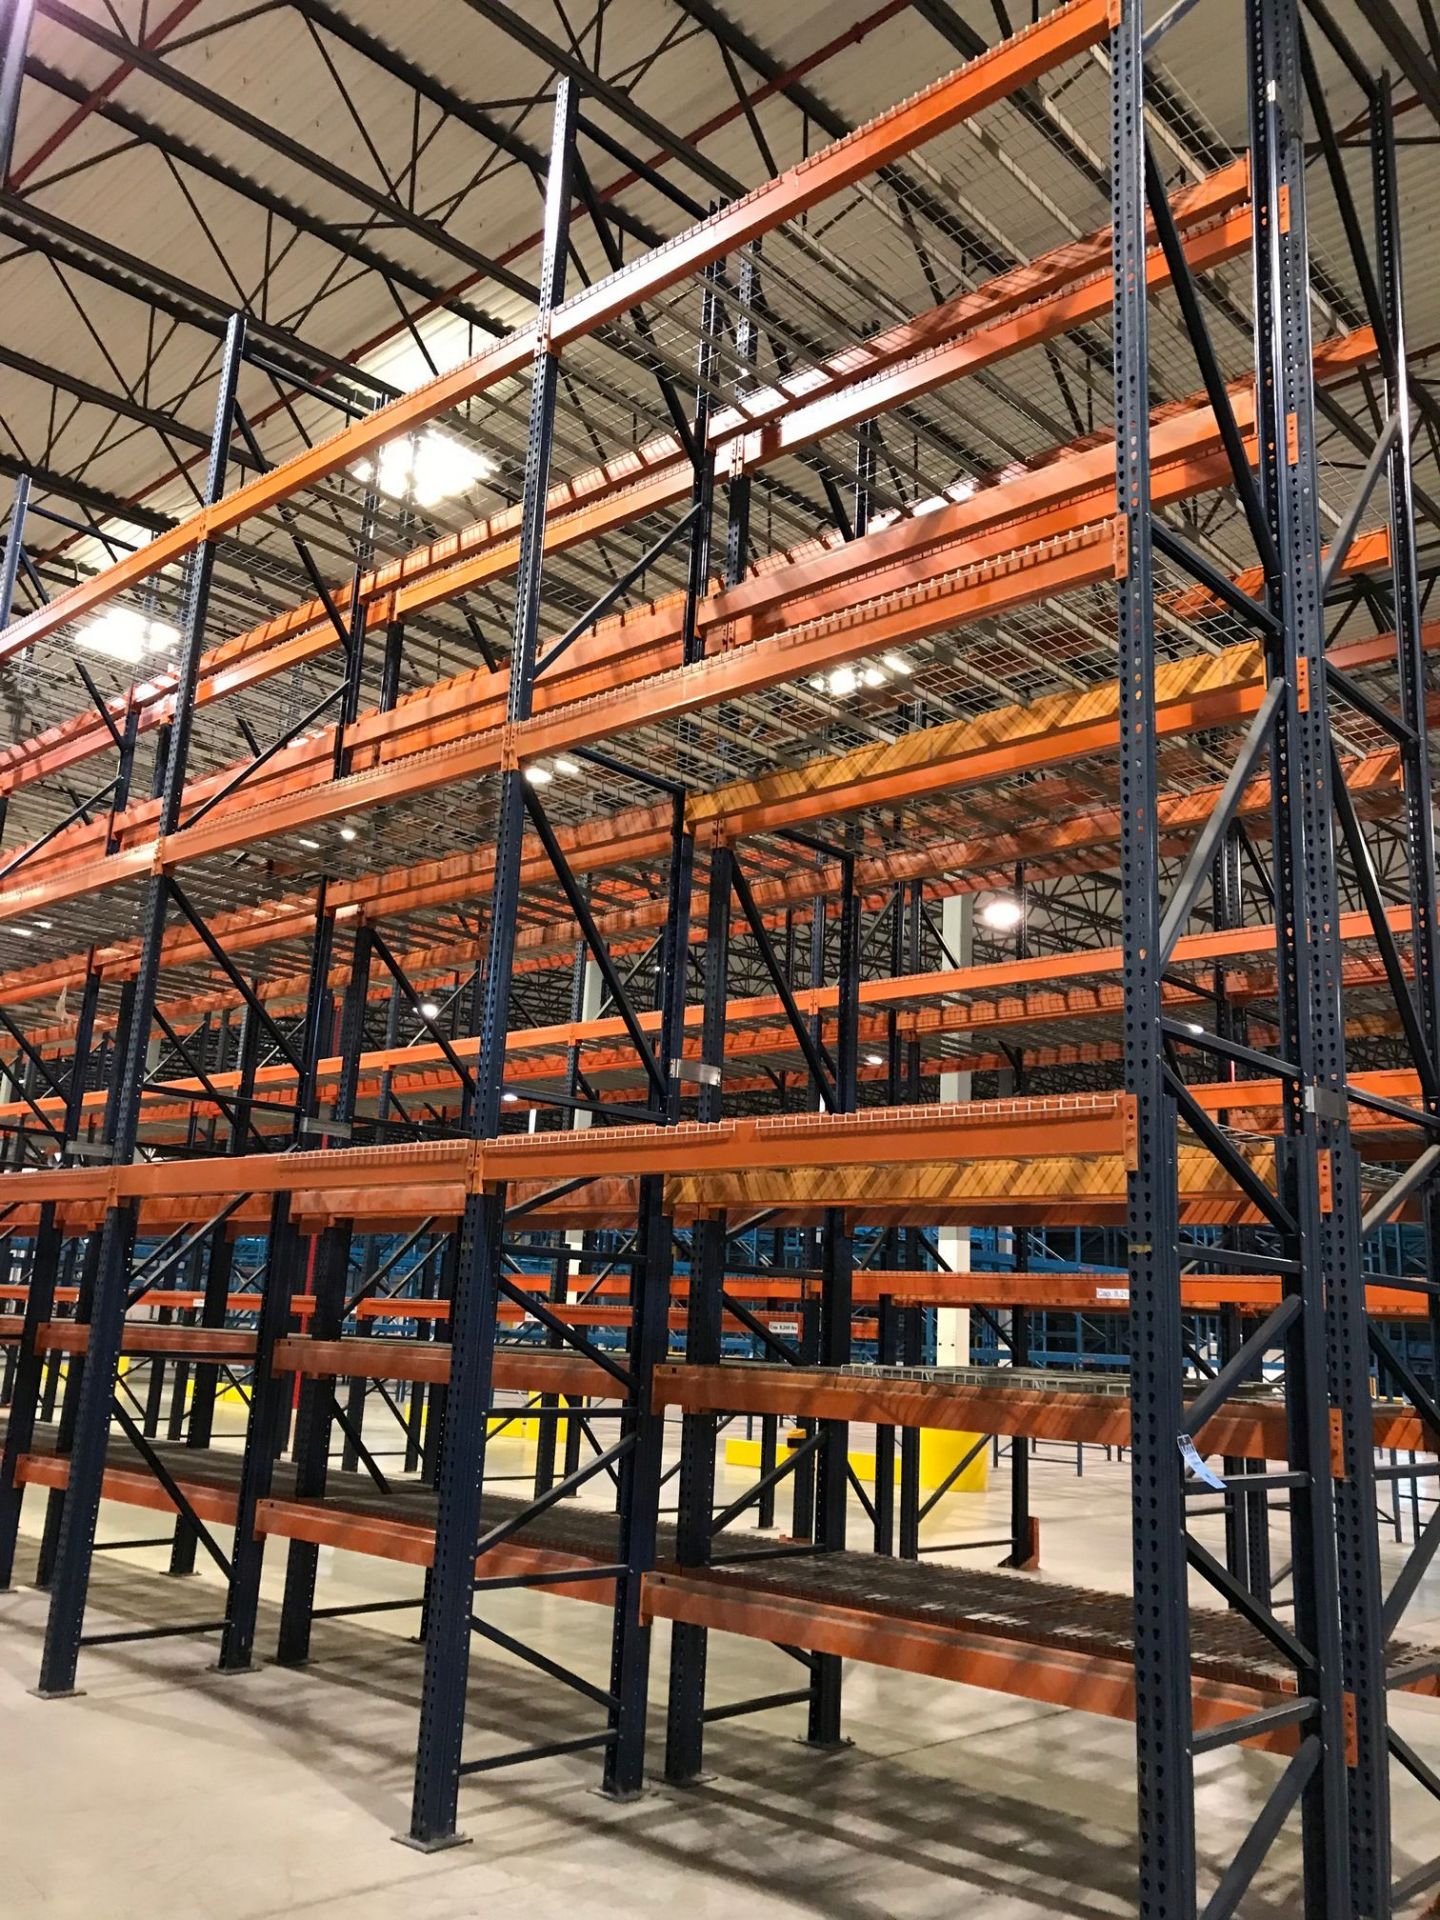 SECTIONS 60" X 108" X 288" TEARDROP TYPE ADJUSTABLE BEAM PALLET RACK WITH WIRE DECKING, 6" HIGH - Image 2 of 14